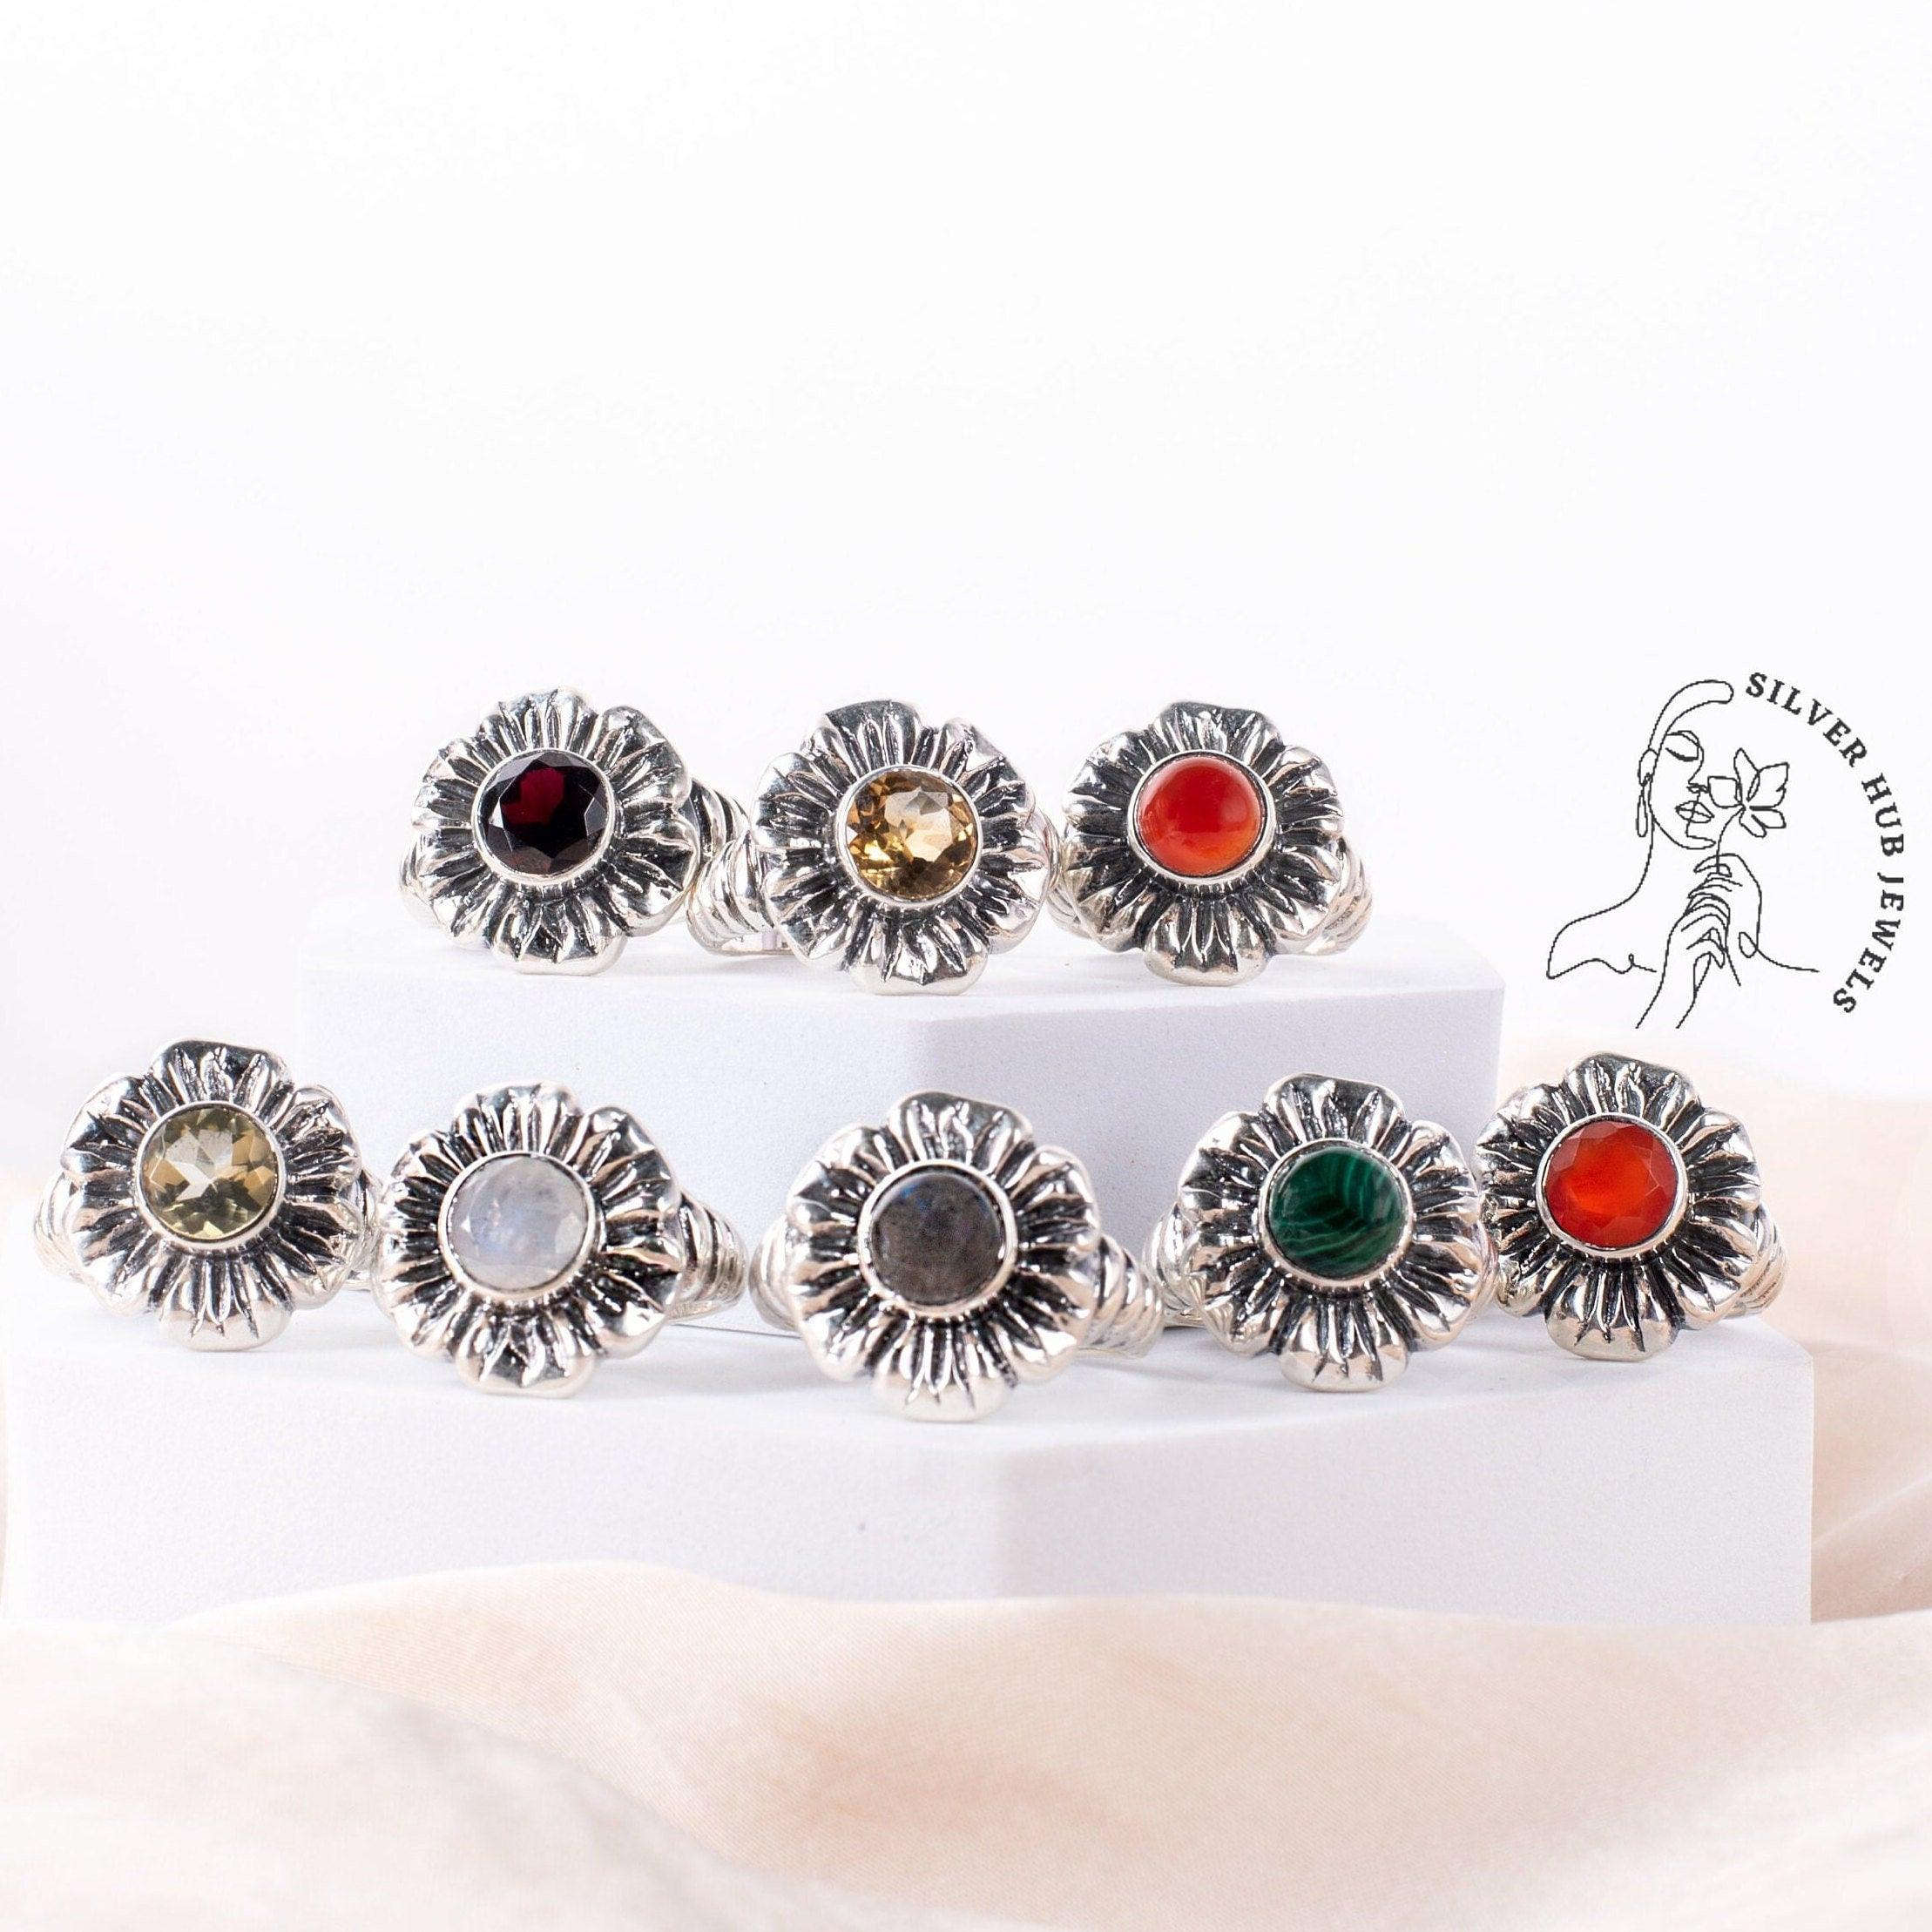 Vintage Sterling Silver Round Shape flower ring-Family birthstone ring-Boho Ring-Natural Gemstone Ring-Multi stone Ring-Gift for mom - Silverhubjewels